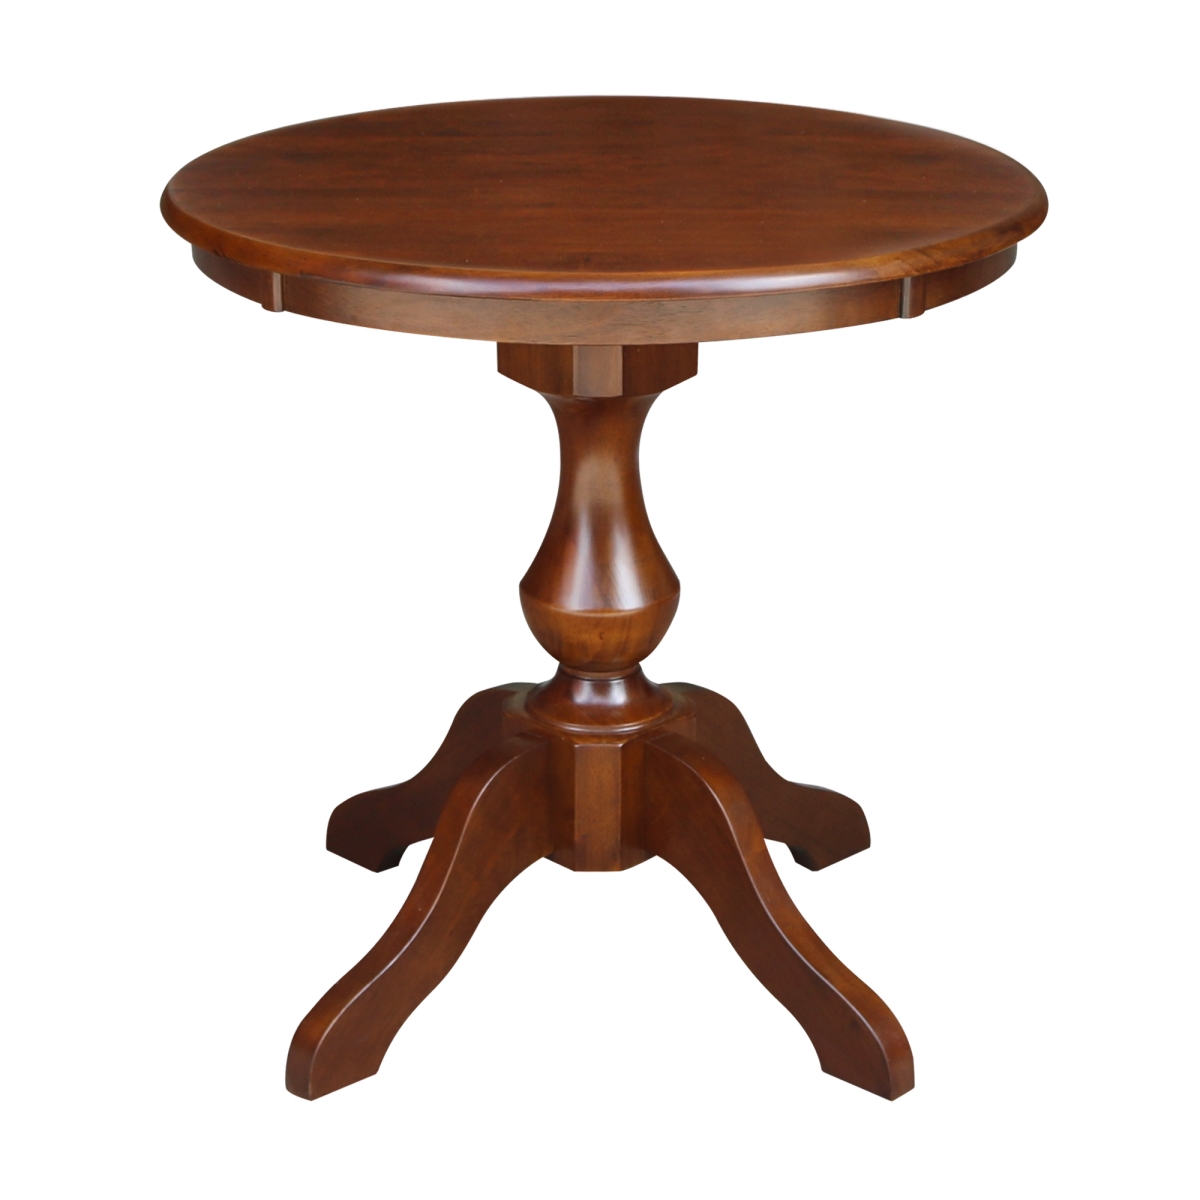 K581-30rt-11b 28.9 X 30 In. Round Top Pedestal Dining Table - Espresso